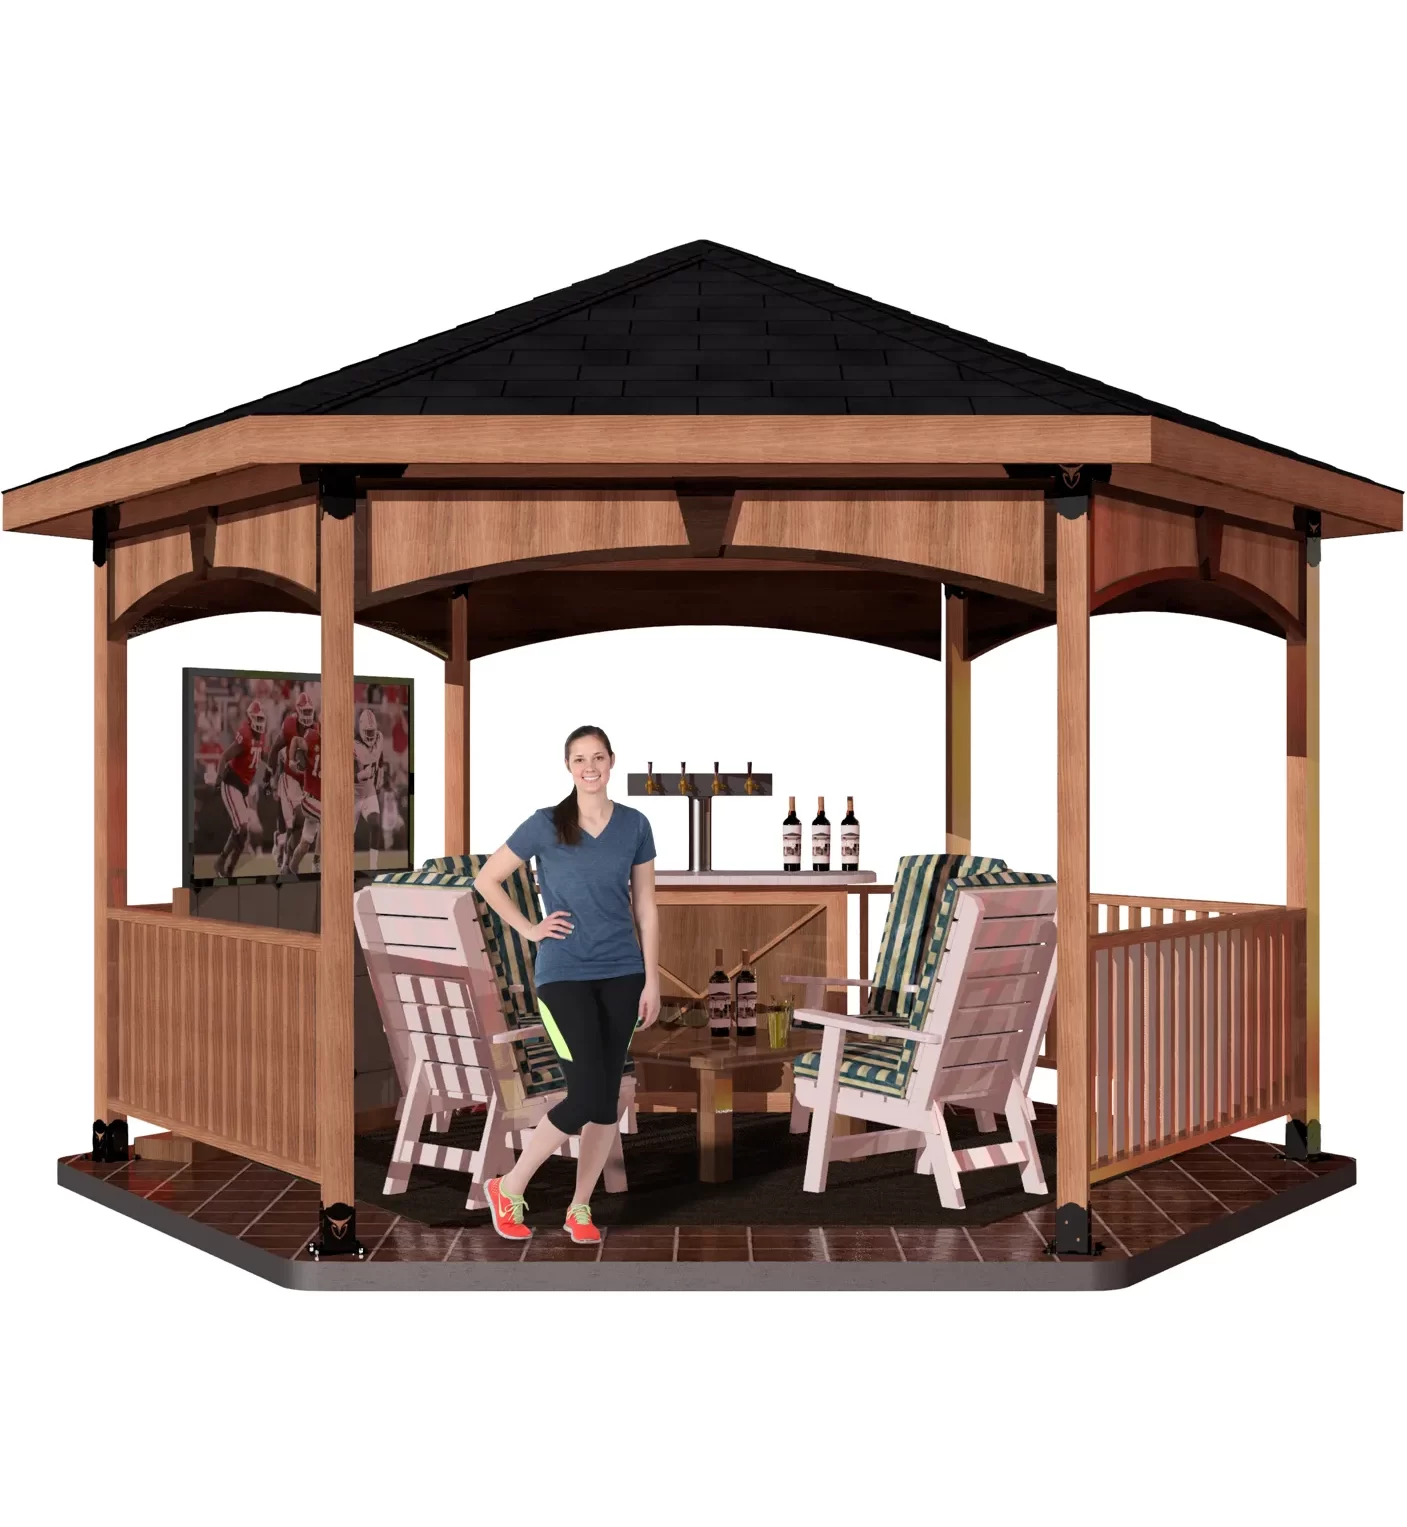 diy, 4X4, surface mounted, solid roofed hexagon patio cover with bar, tv, and casual seating